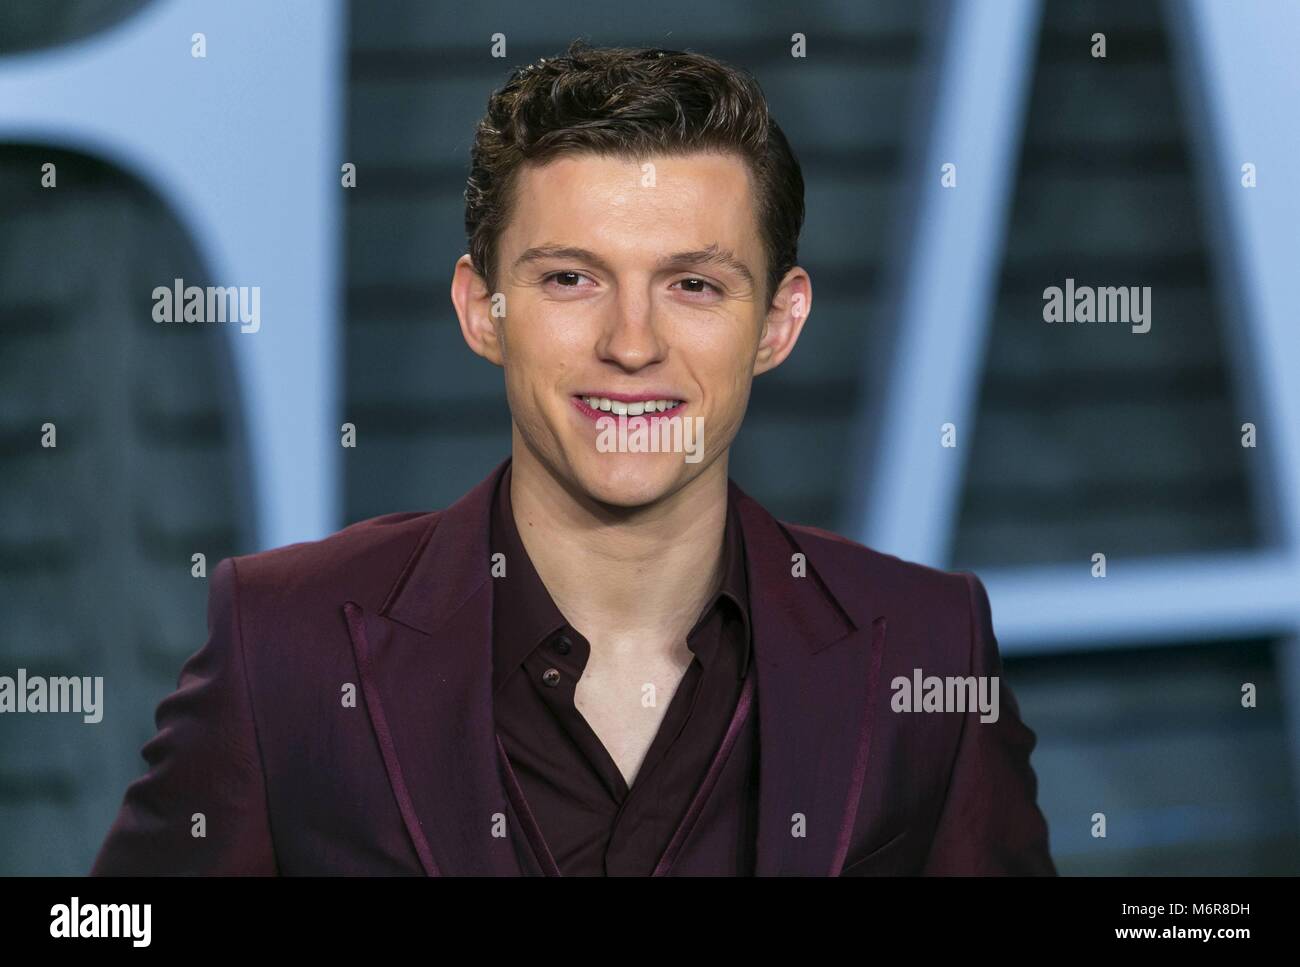 Tom Holland assiste il Vanity Fair Oscar Party a Wallis Annenberg Center for the Performing Arts di Beverly Hills, Los Angeles, Stati Uniti d'America, il 04 marzo 2018. | Verwendung weltweit Foto Stock